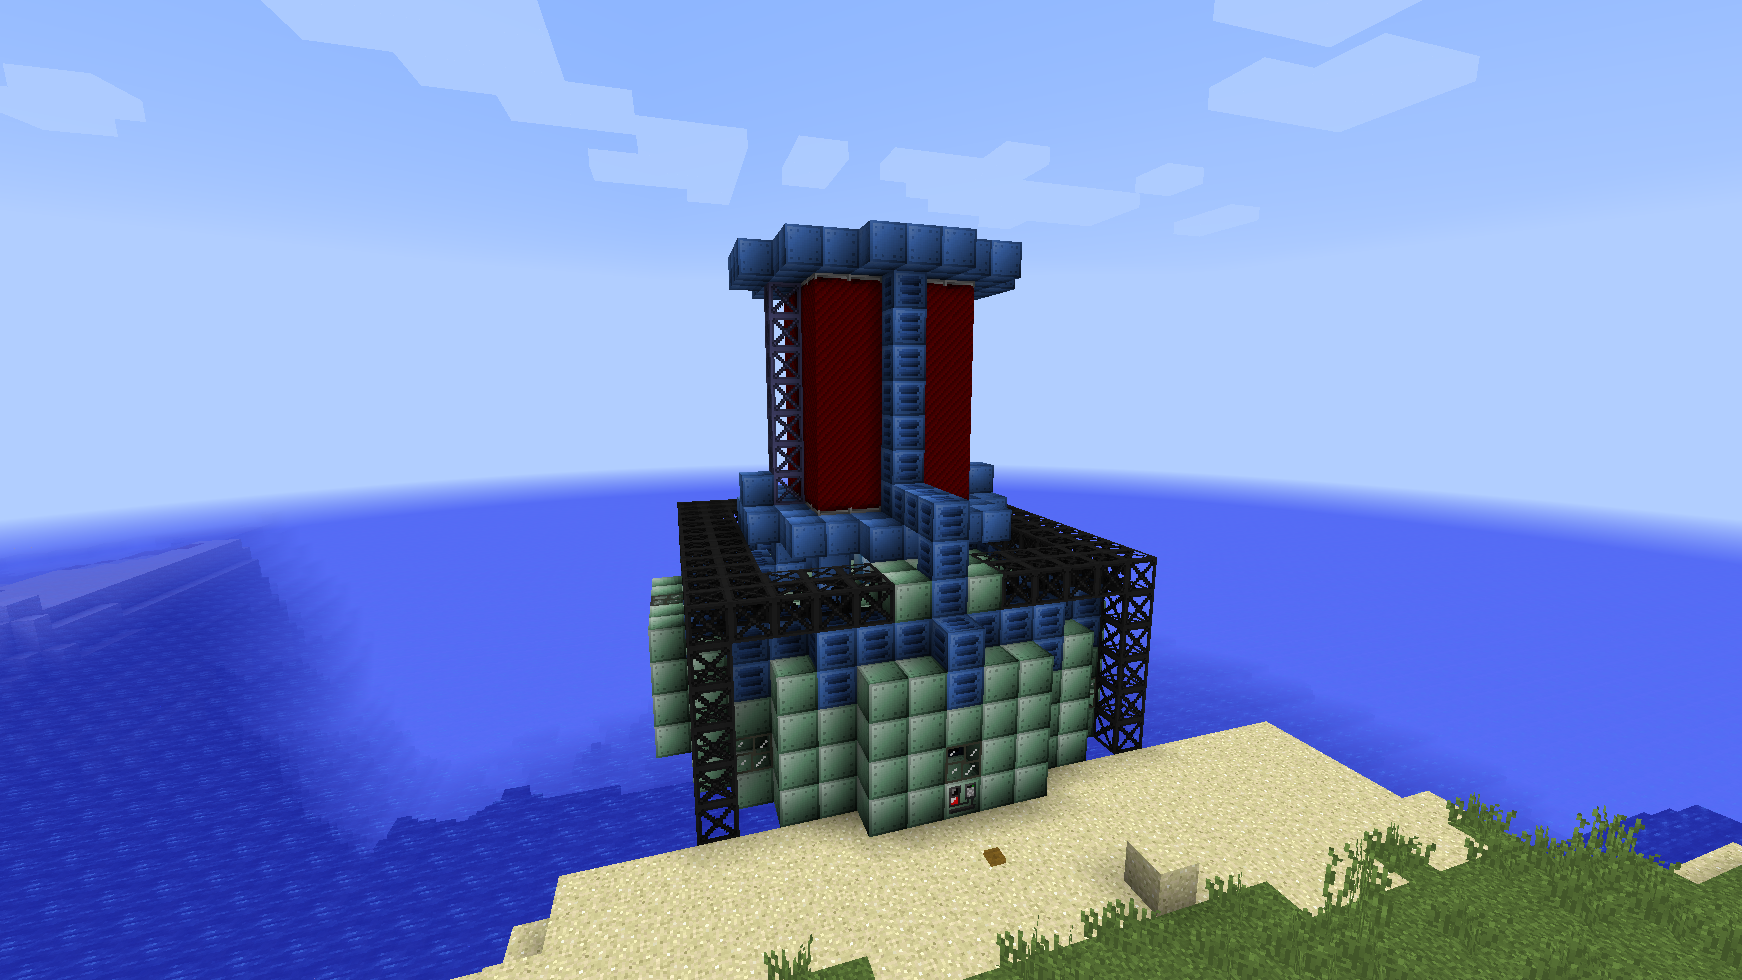 This beast of a structure makes a return from the original Gregicality. Capable of smelting massive amounts of Blast Furnace recipes in seconds!